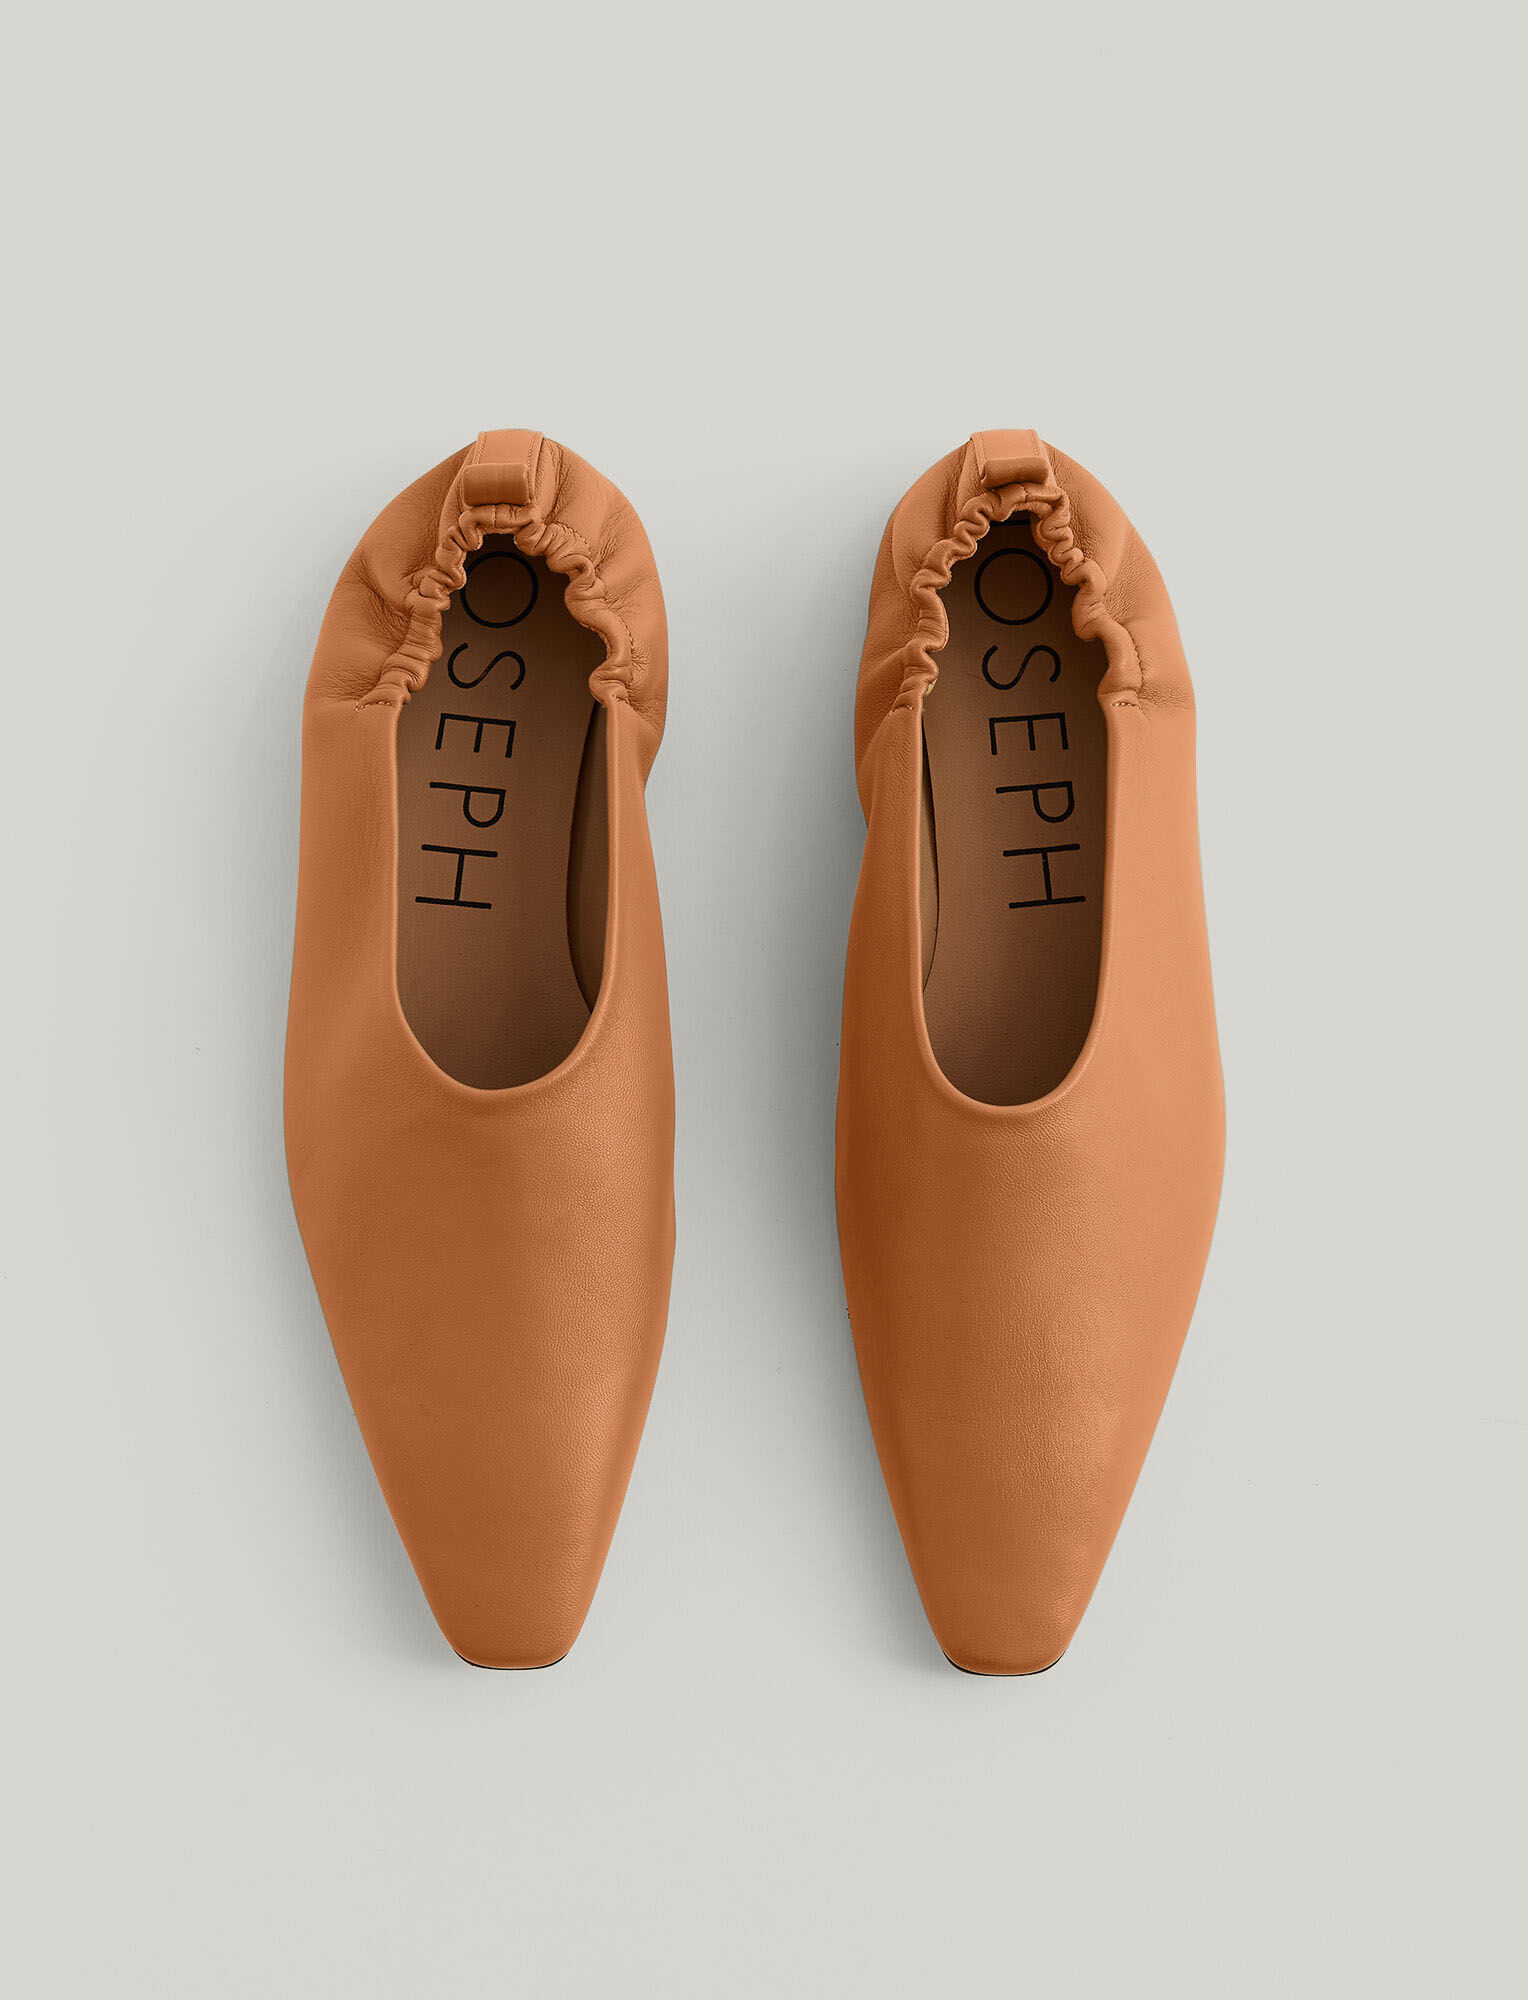 Joseph, Leather Pointy Ballerina Shoes, in Caramel